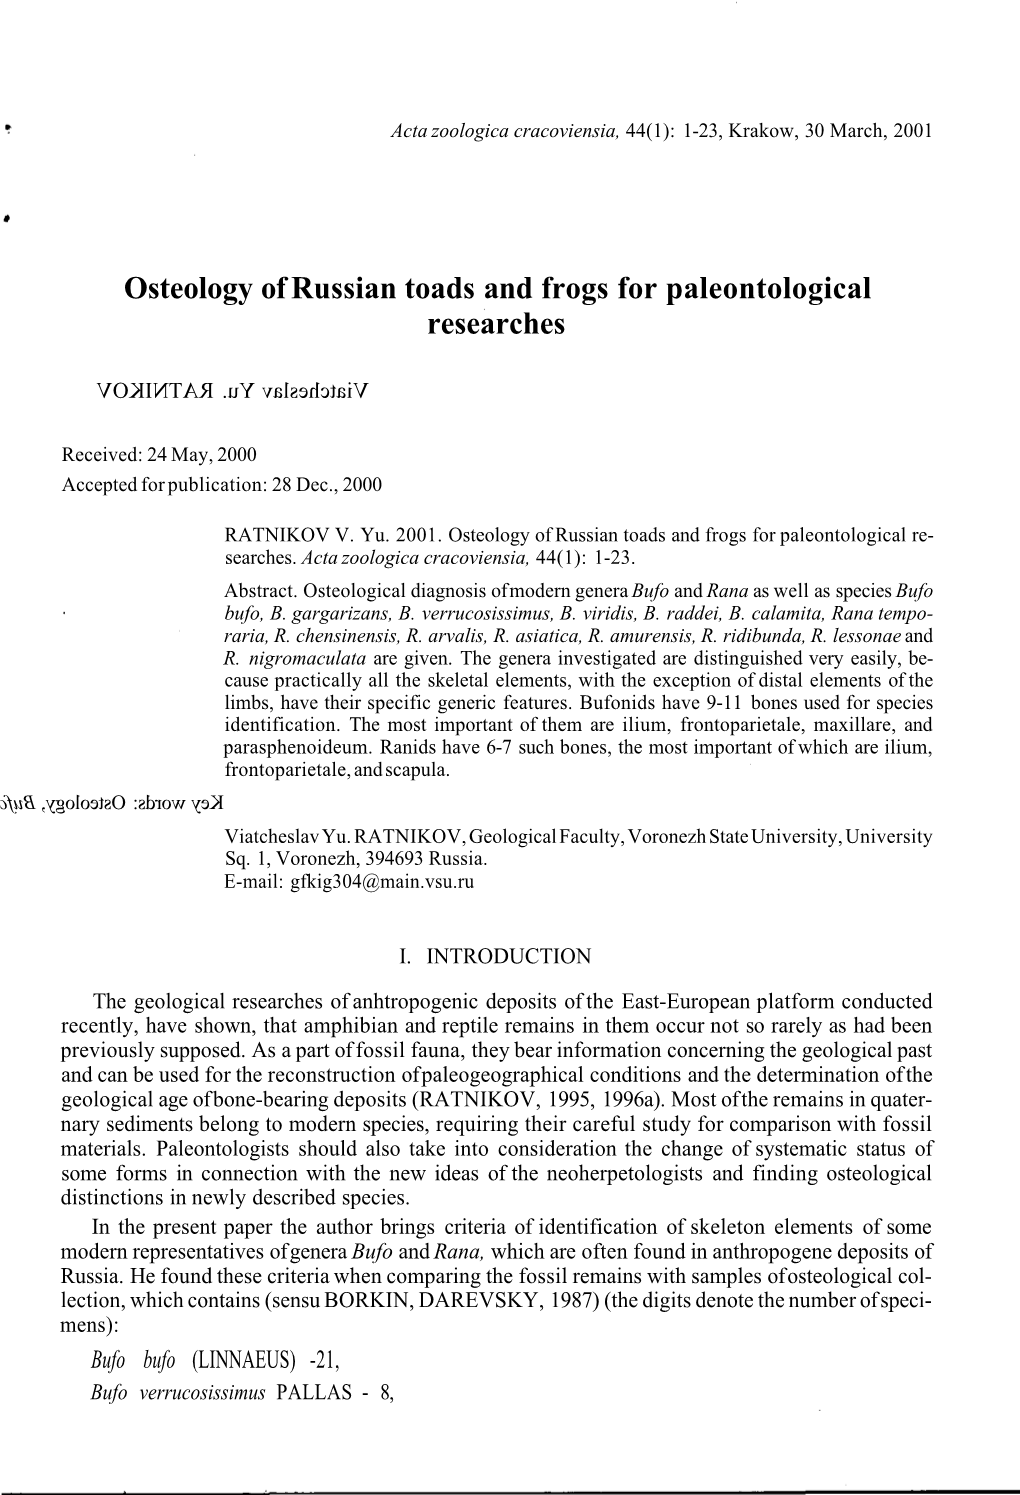 Osteology of Russian Toads and Frogs for Paleontological Researches